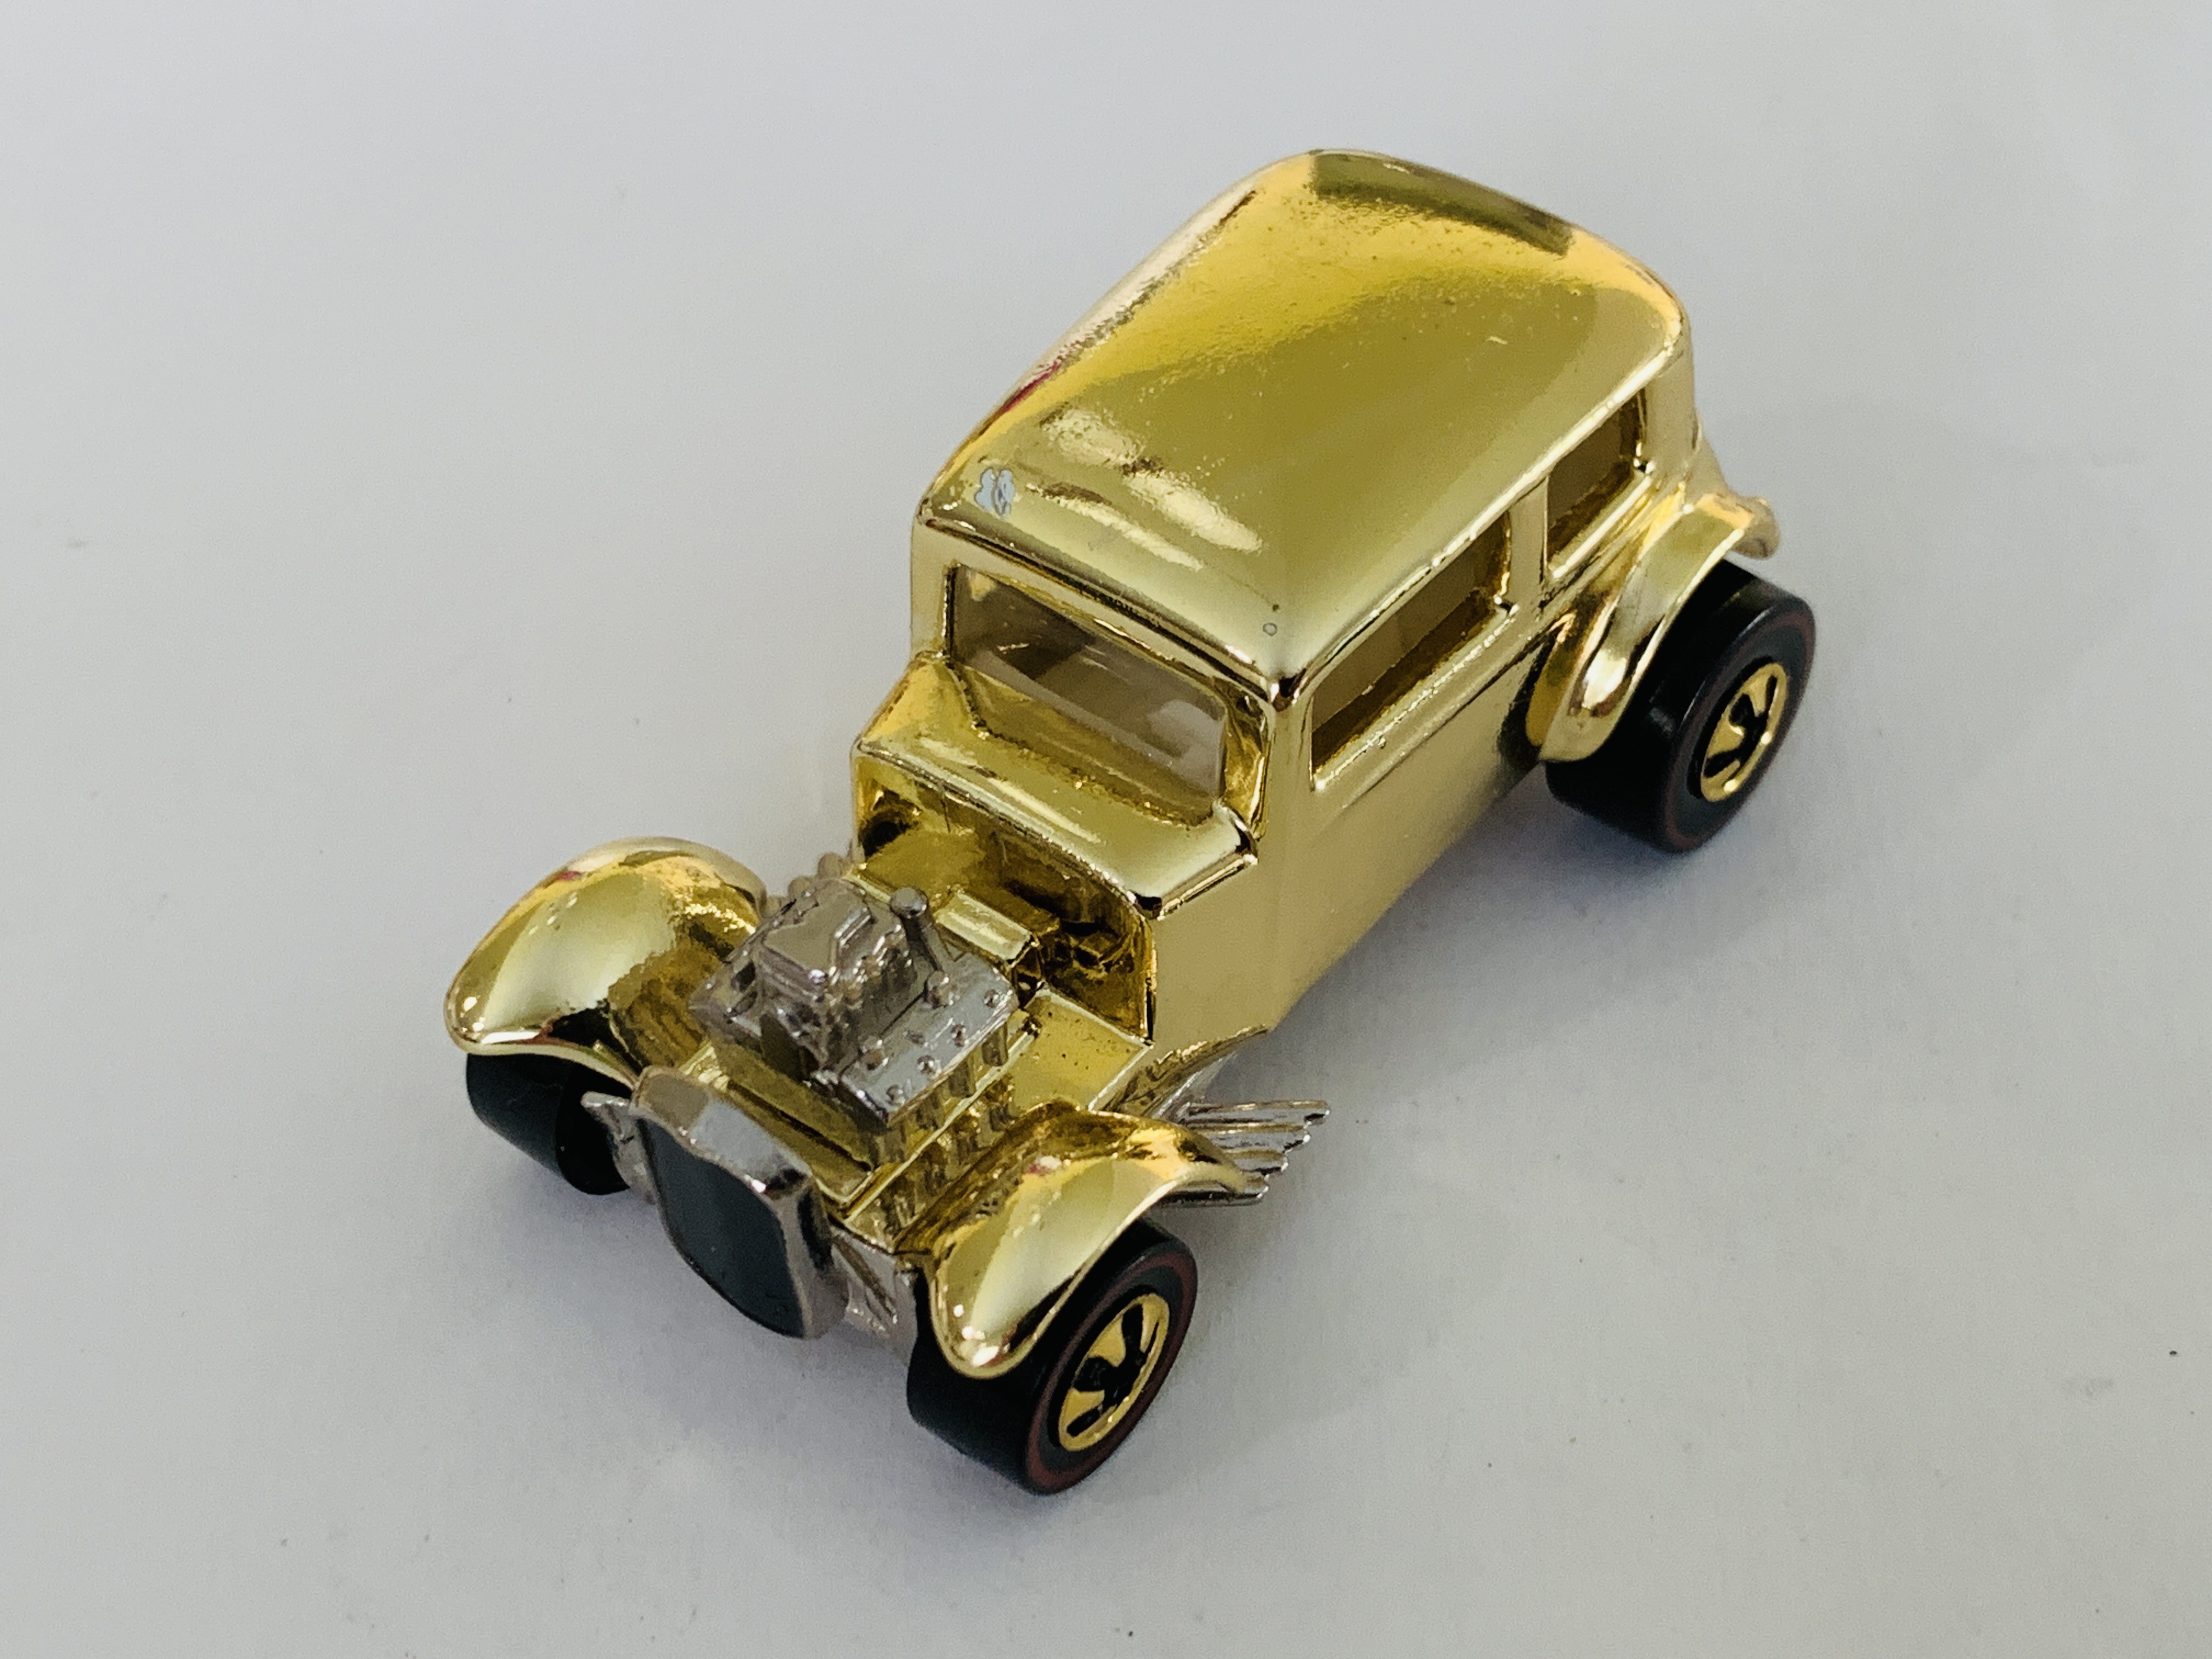 Hot Wheels FAO Schwarz Gold Series '32 Ford Vickey - Roof Chip